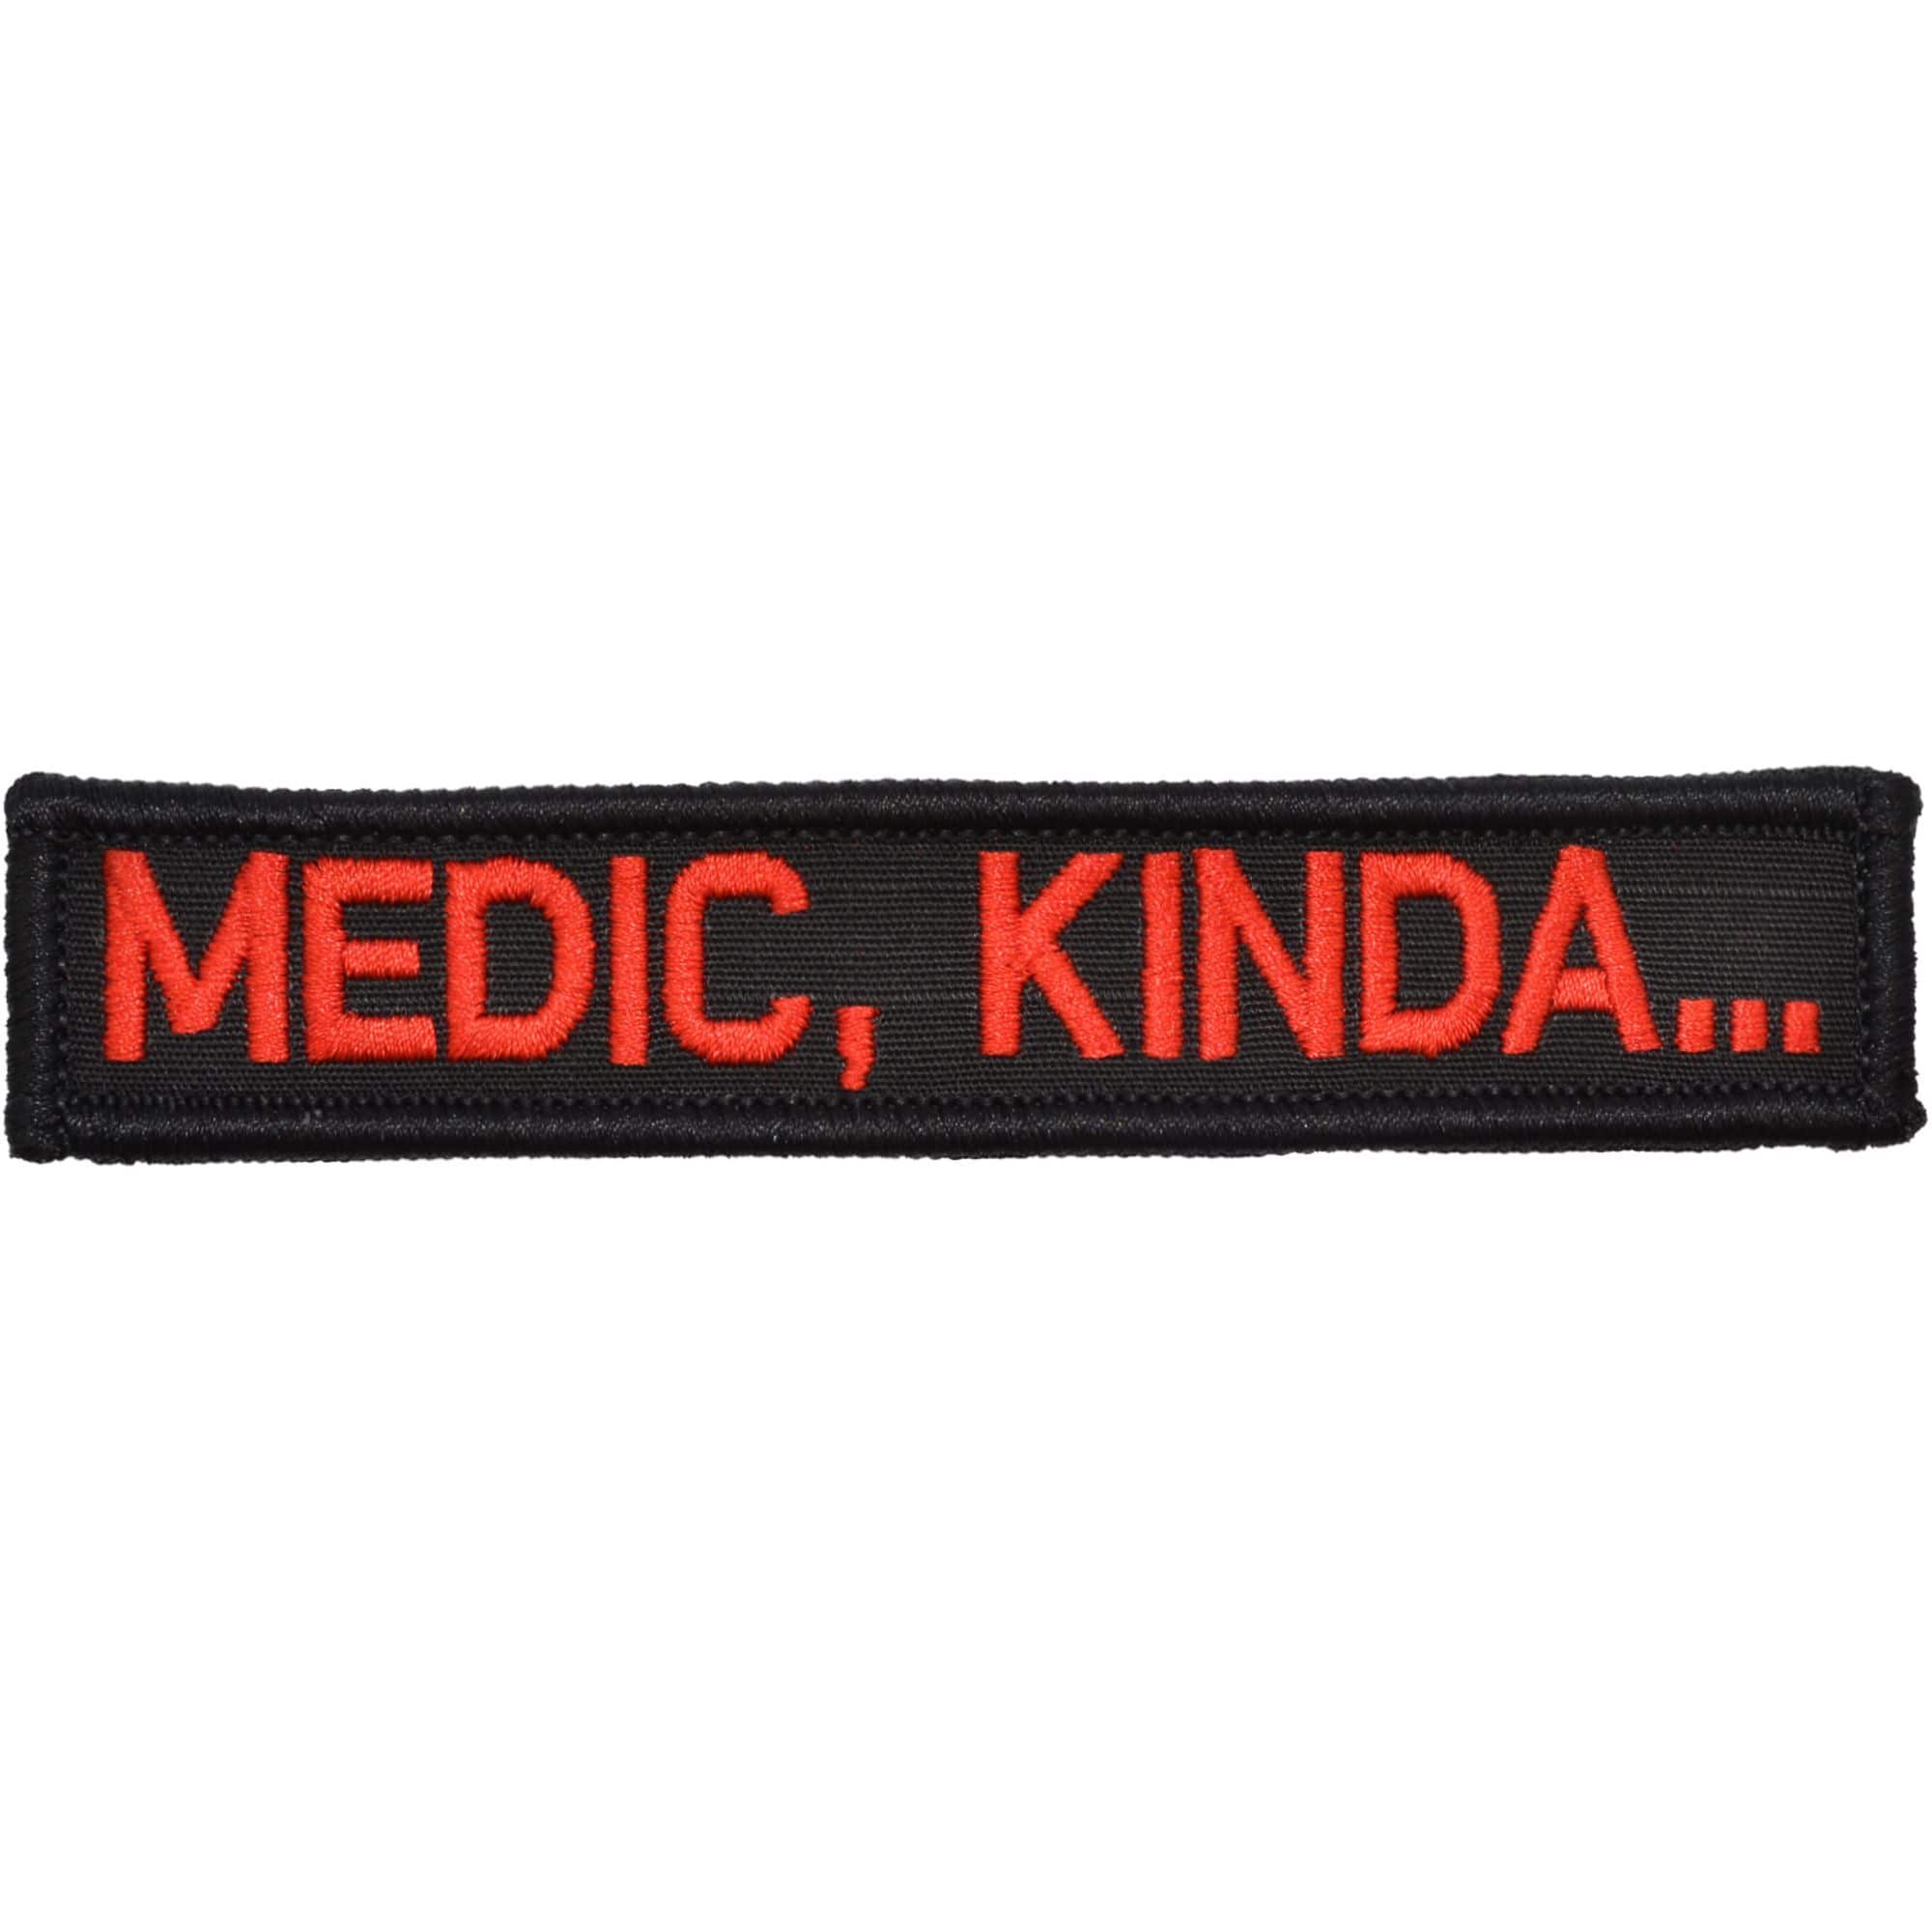 Tactical Gear Junkie Patches Black w/ Red Medic, Kinda... - 1x5 Patch